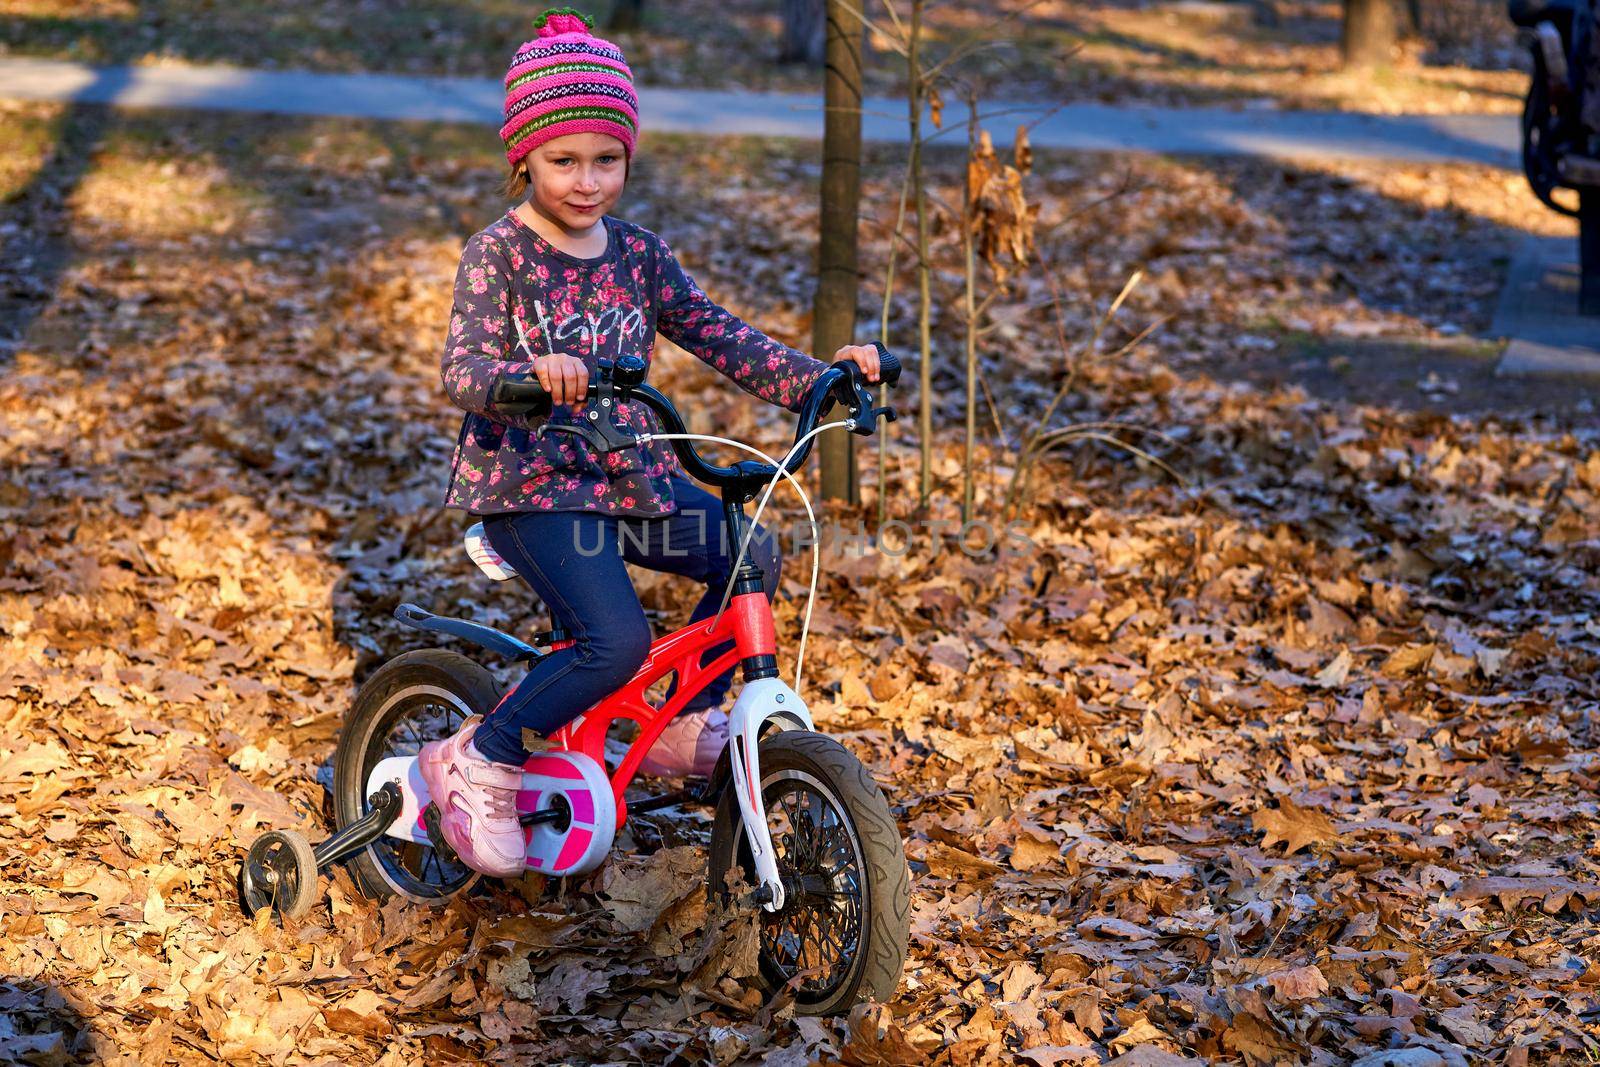 a vehicle composed of two wheels held in a frame one behind the other, propelled by pedals with handlebars attached to the front wheel. Child with a bike in the autumn park among colorful foliage.